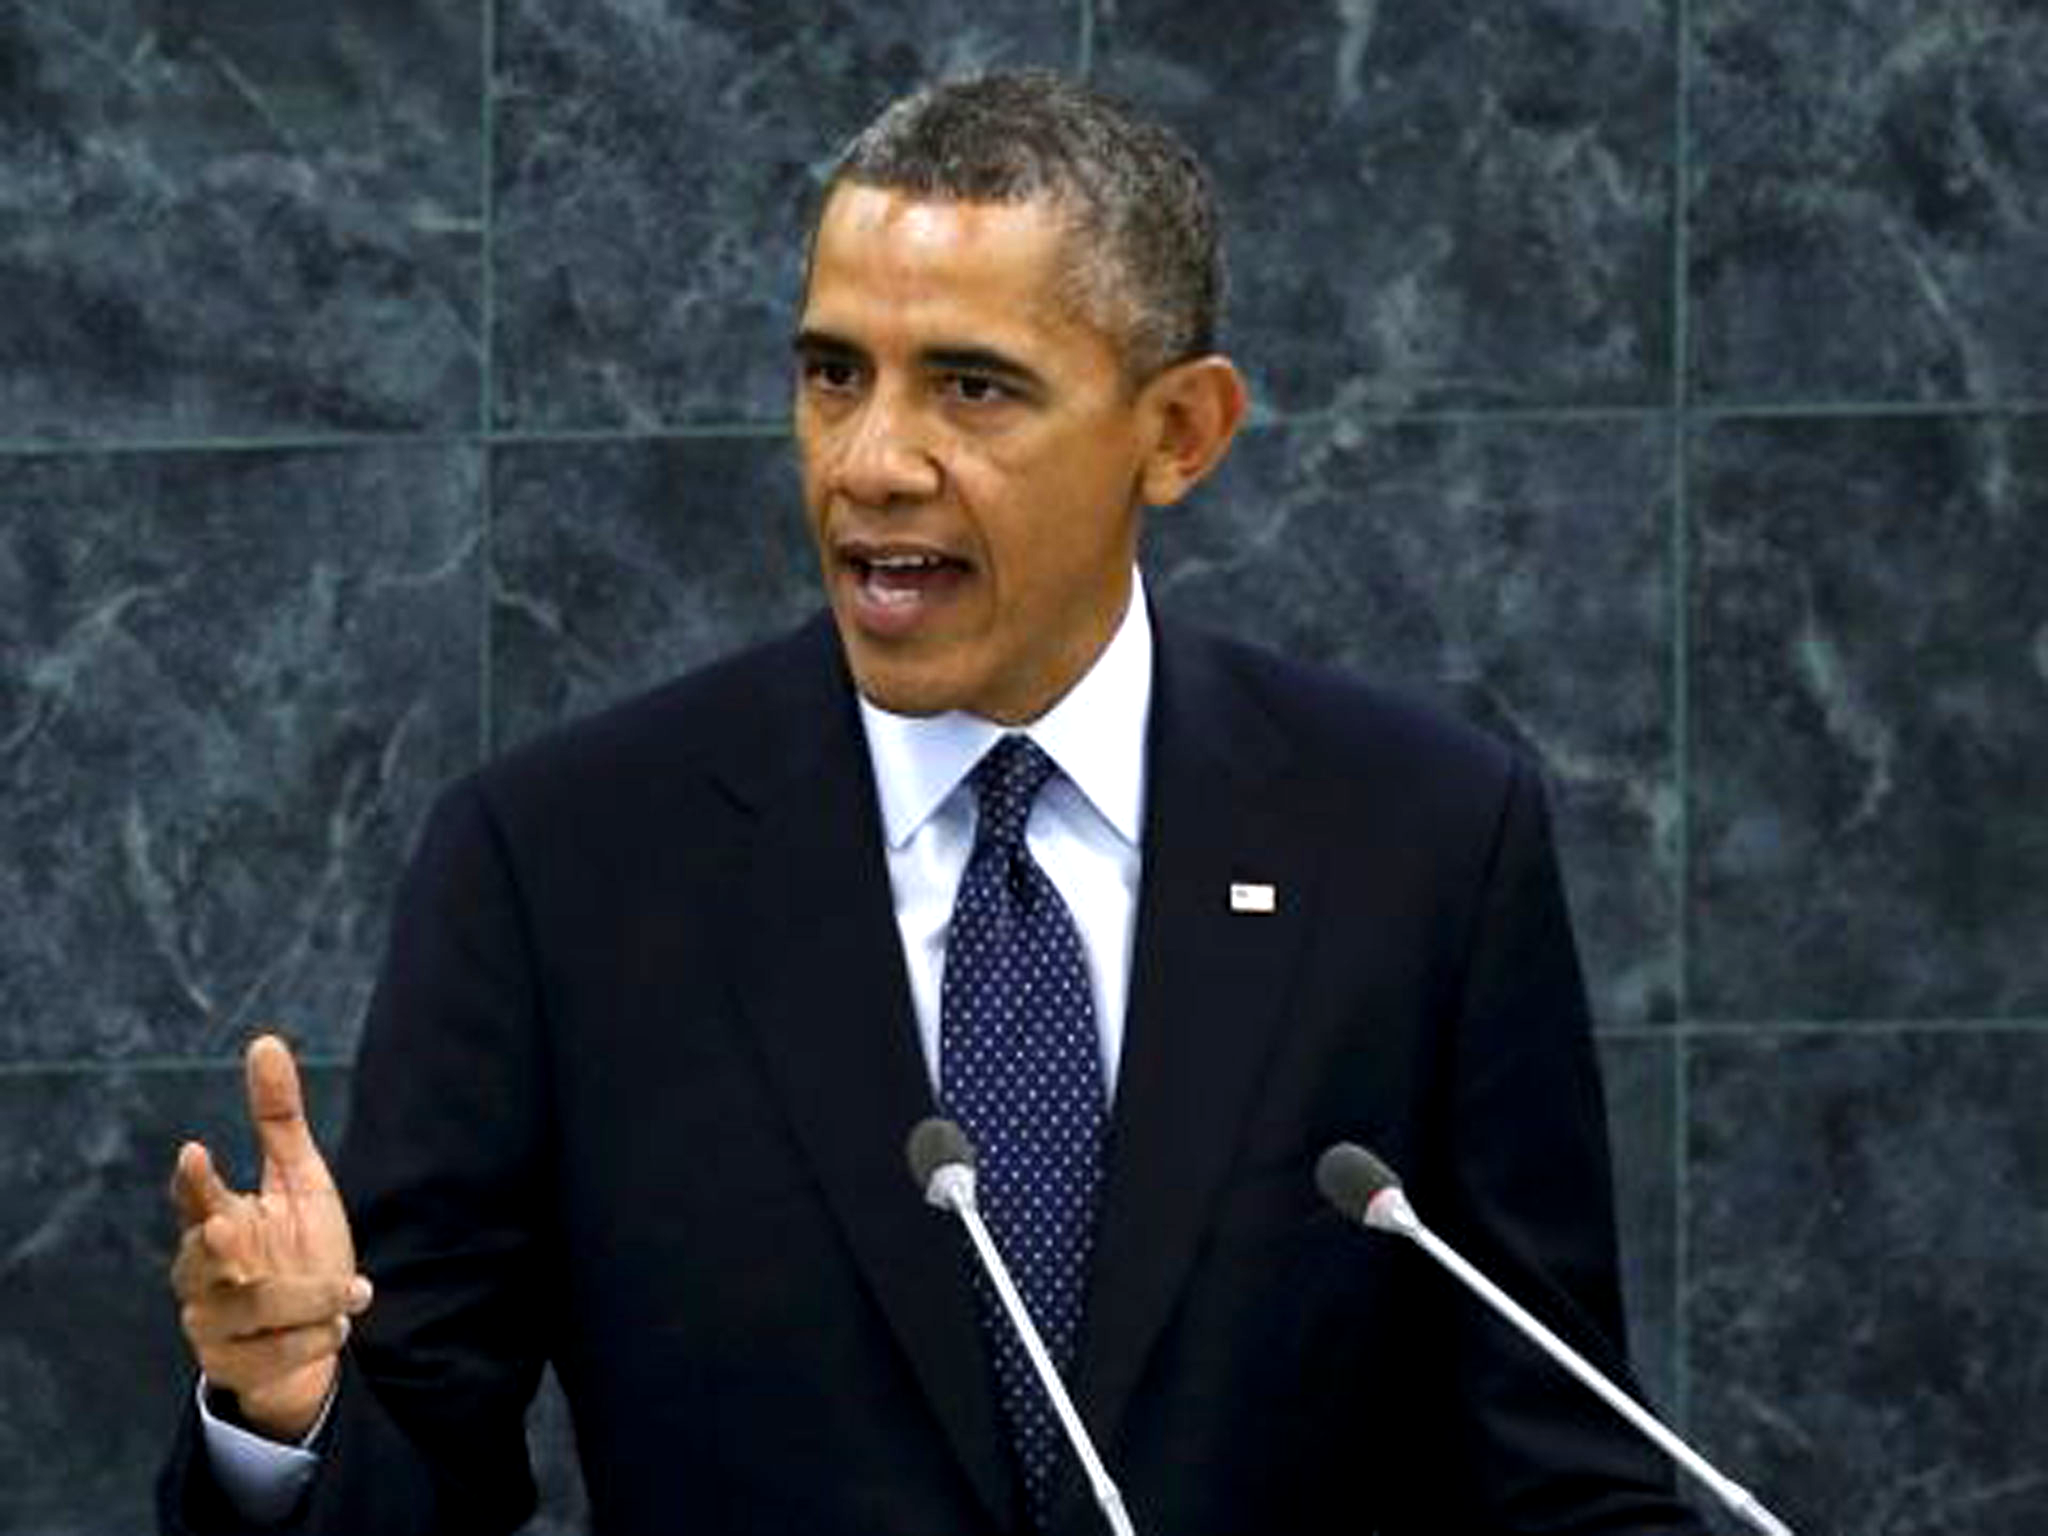 President Barack Obama addresses the 68th United Nations General Assembly at UN headquarters in New York